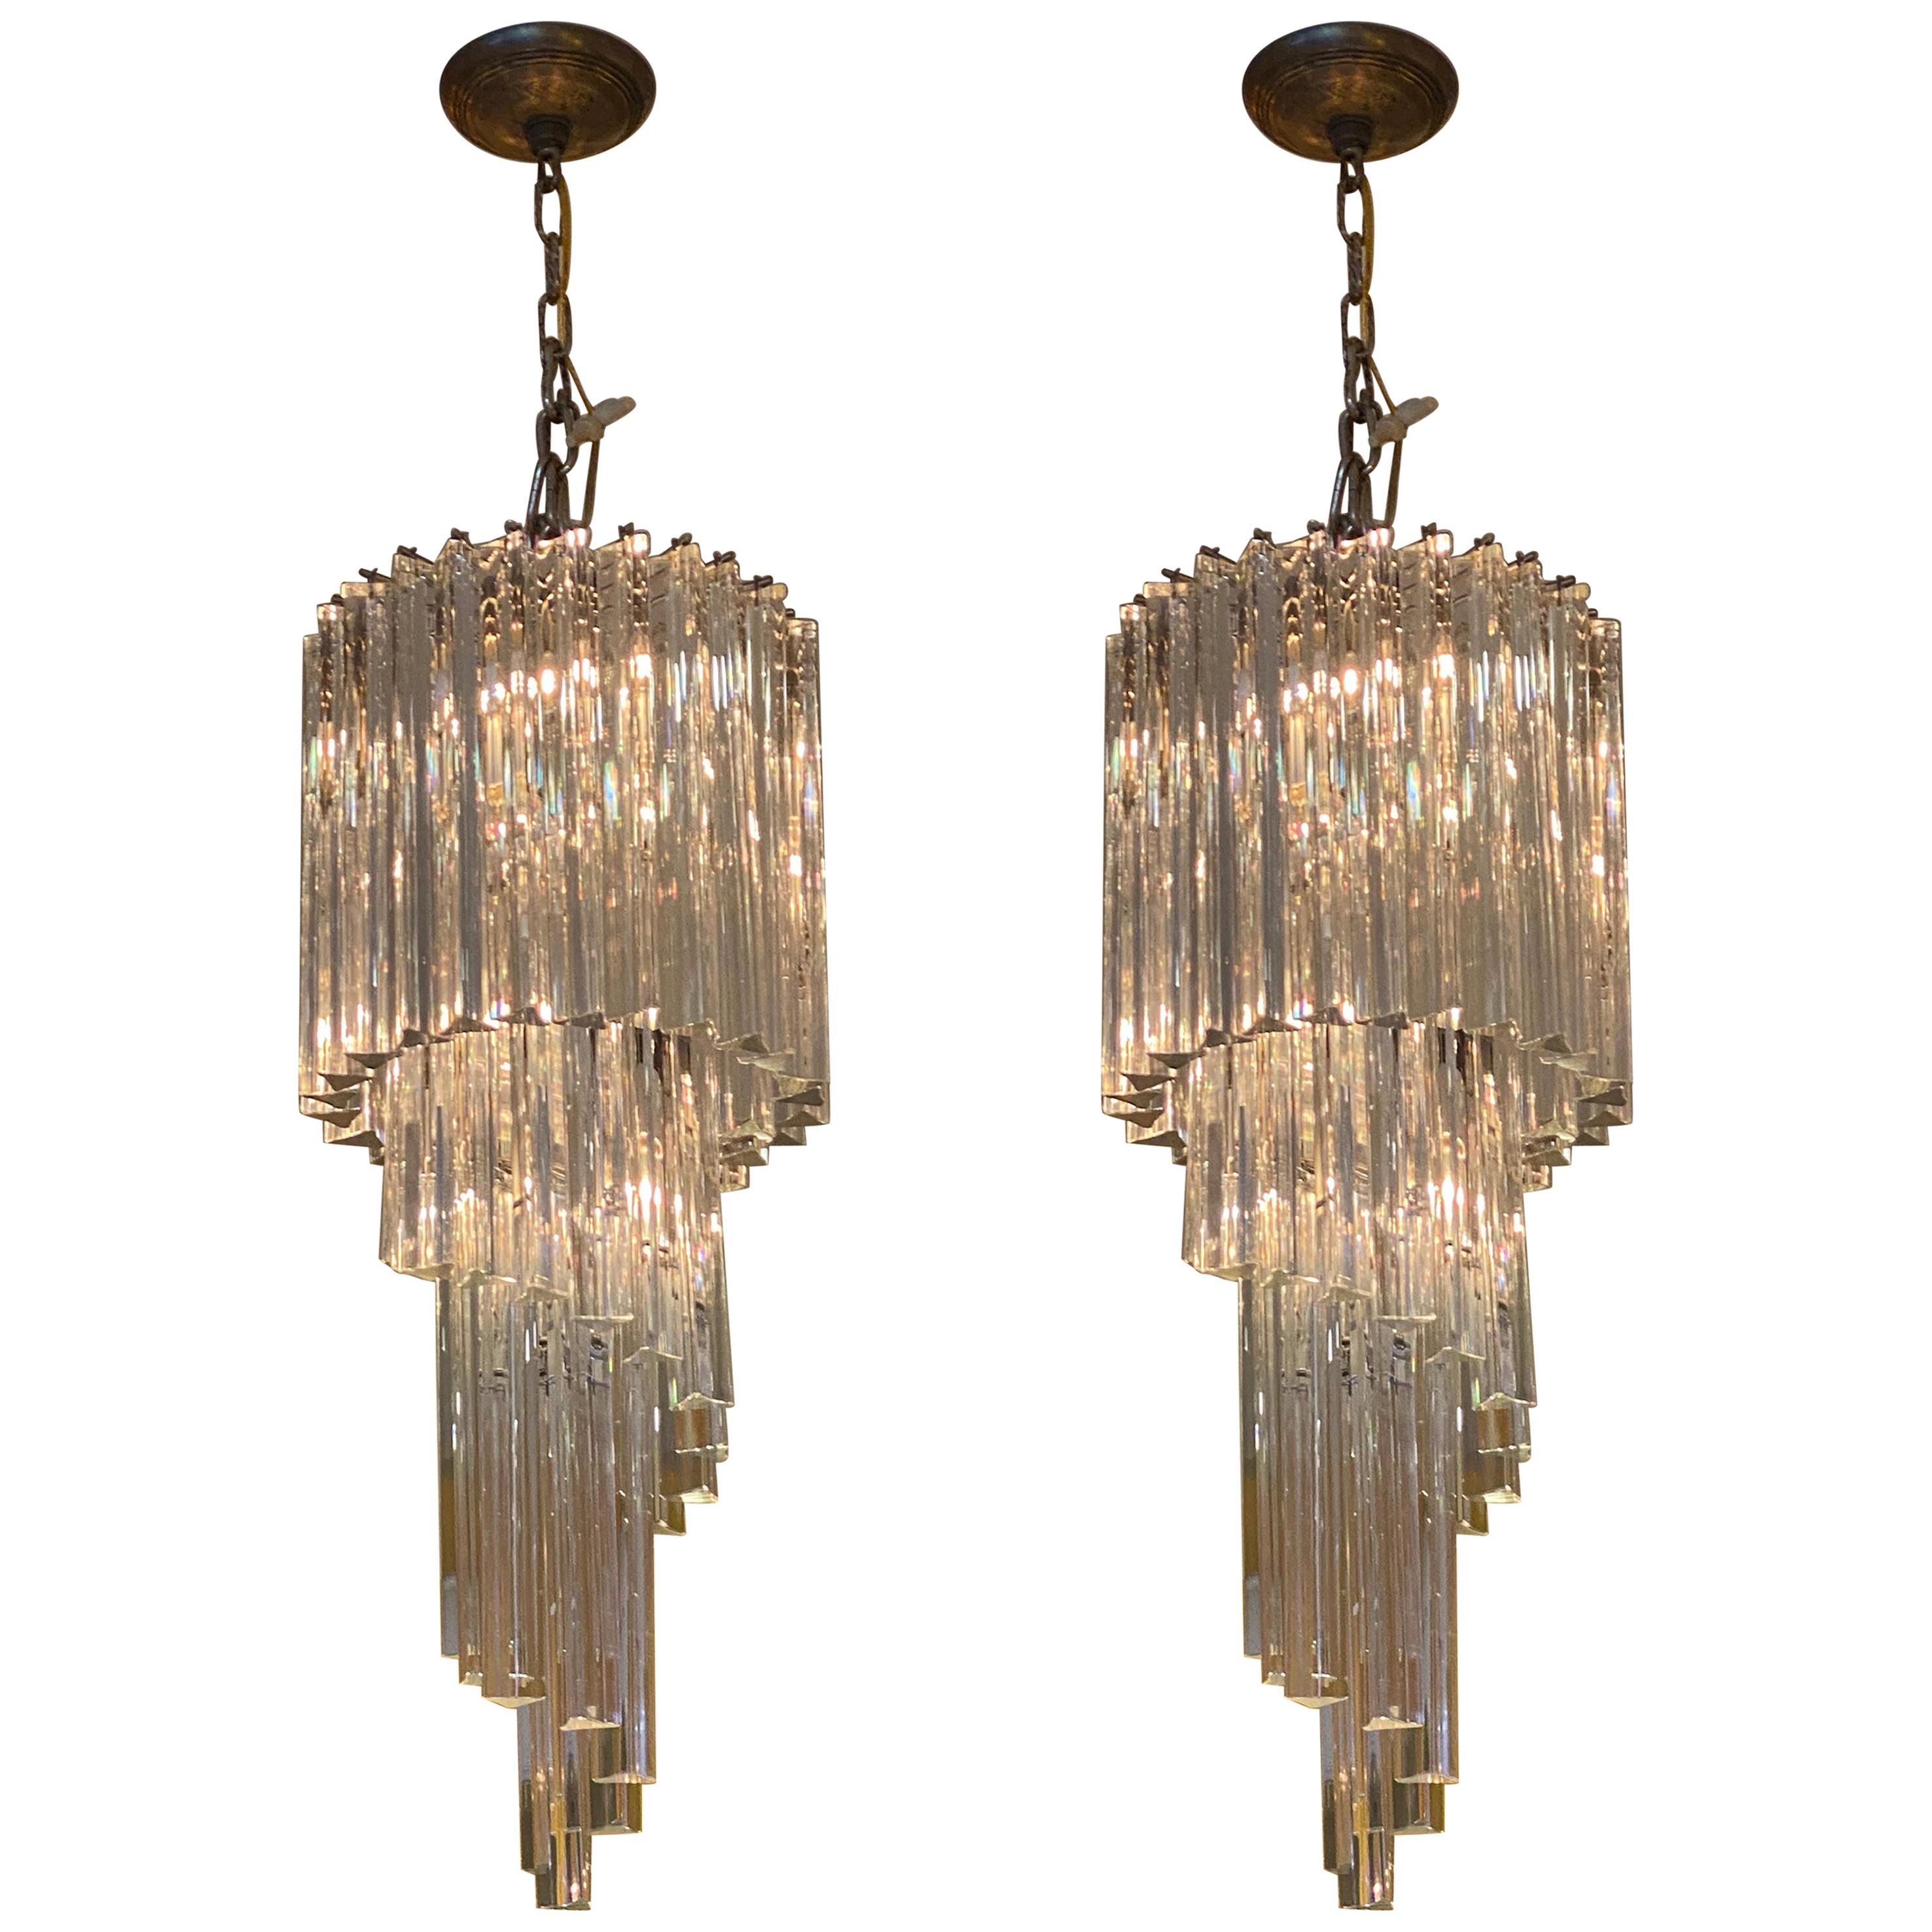 Pair of Waterfall Chandeliers by Camer Company Italy